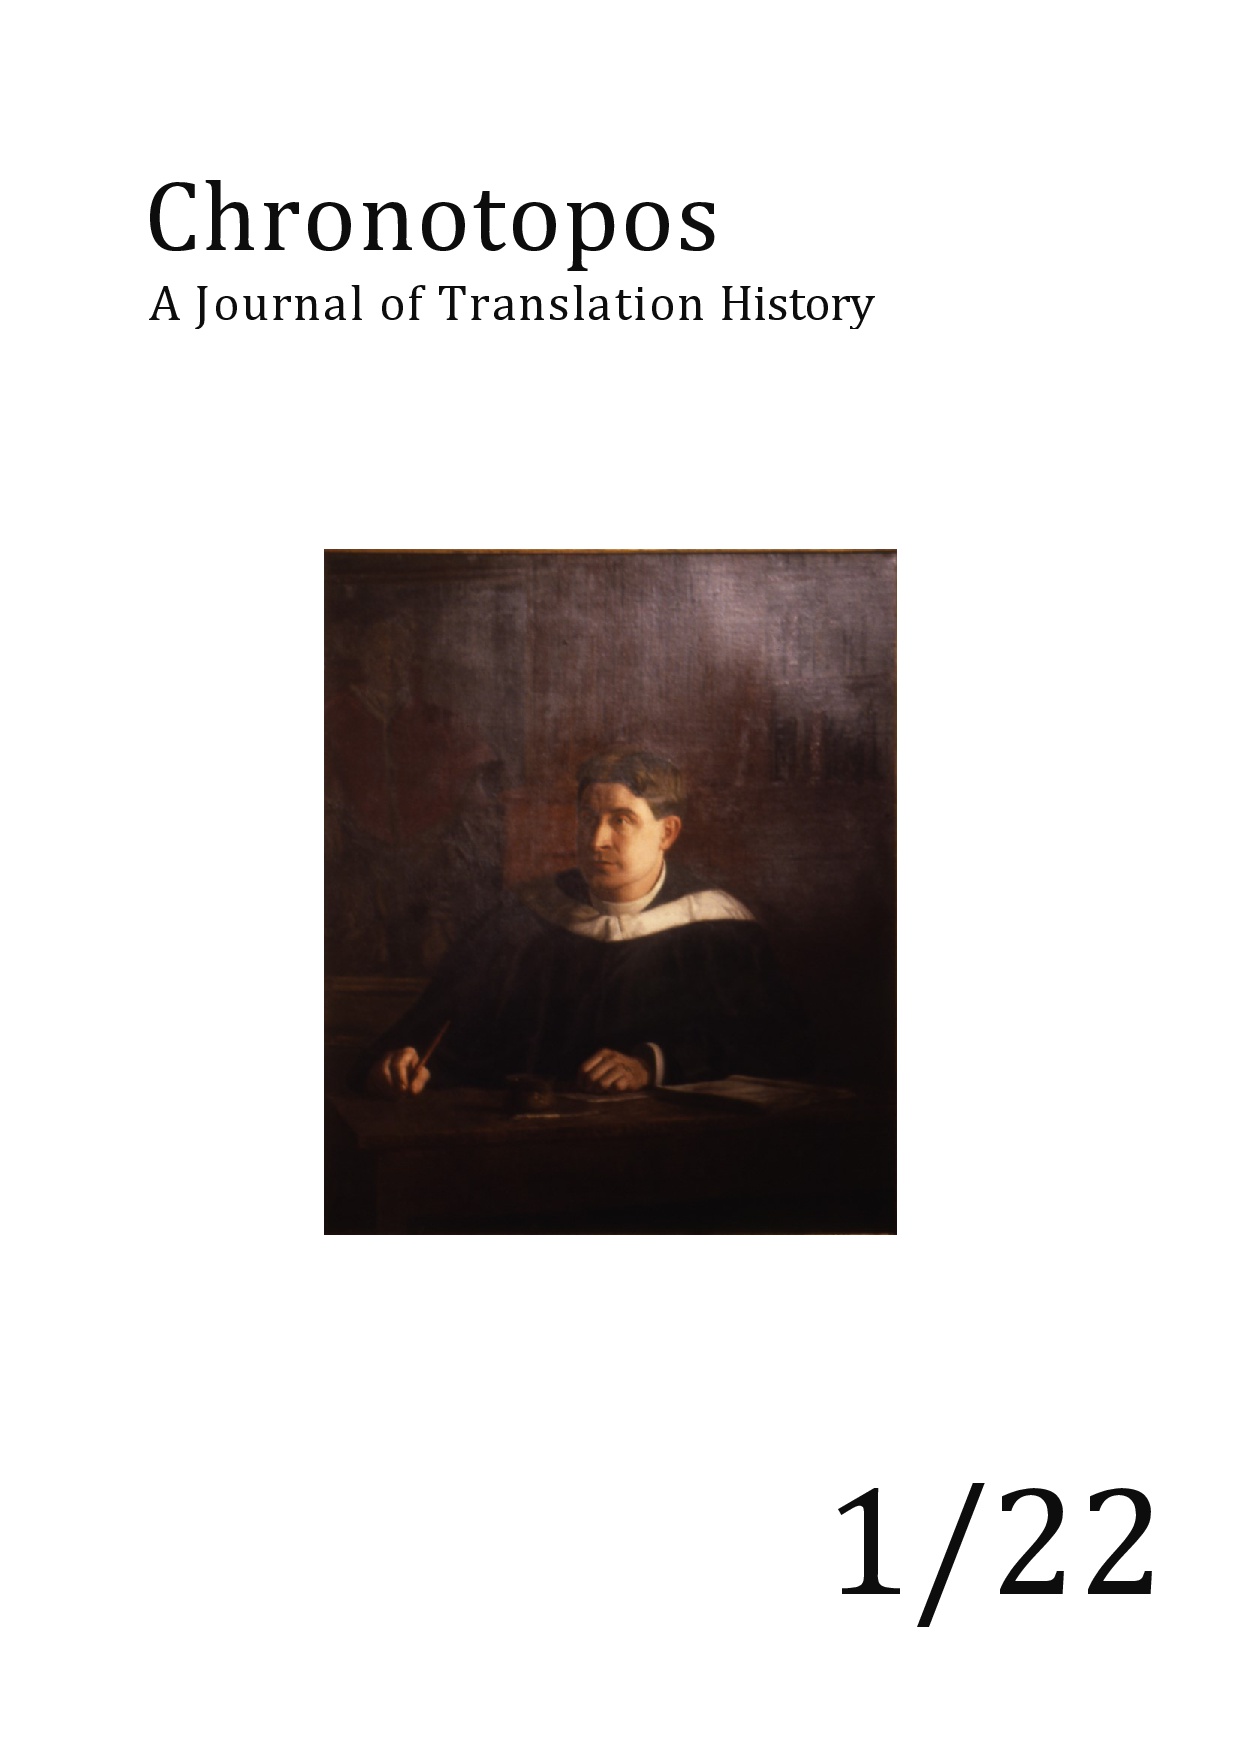 Cover page with black letters stating "Chronotopos - A Journal of Translation History 1/22", in the centre a painting depicting a white man in a robe, titled "the translator"